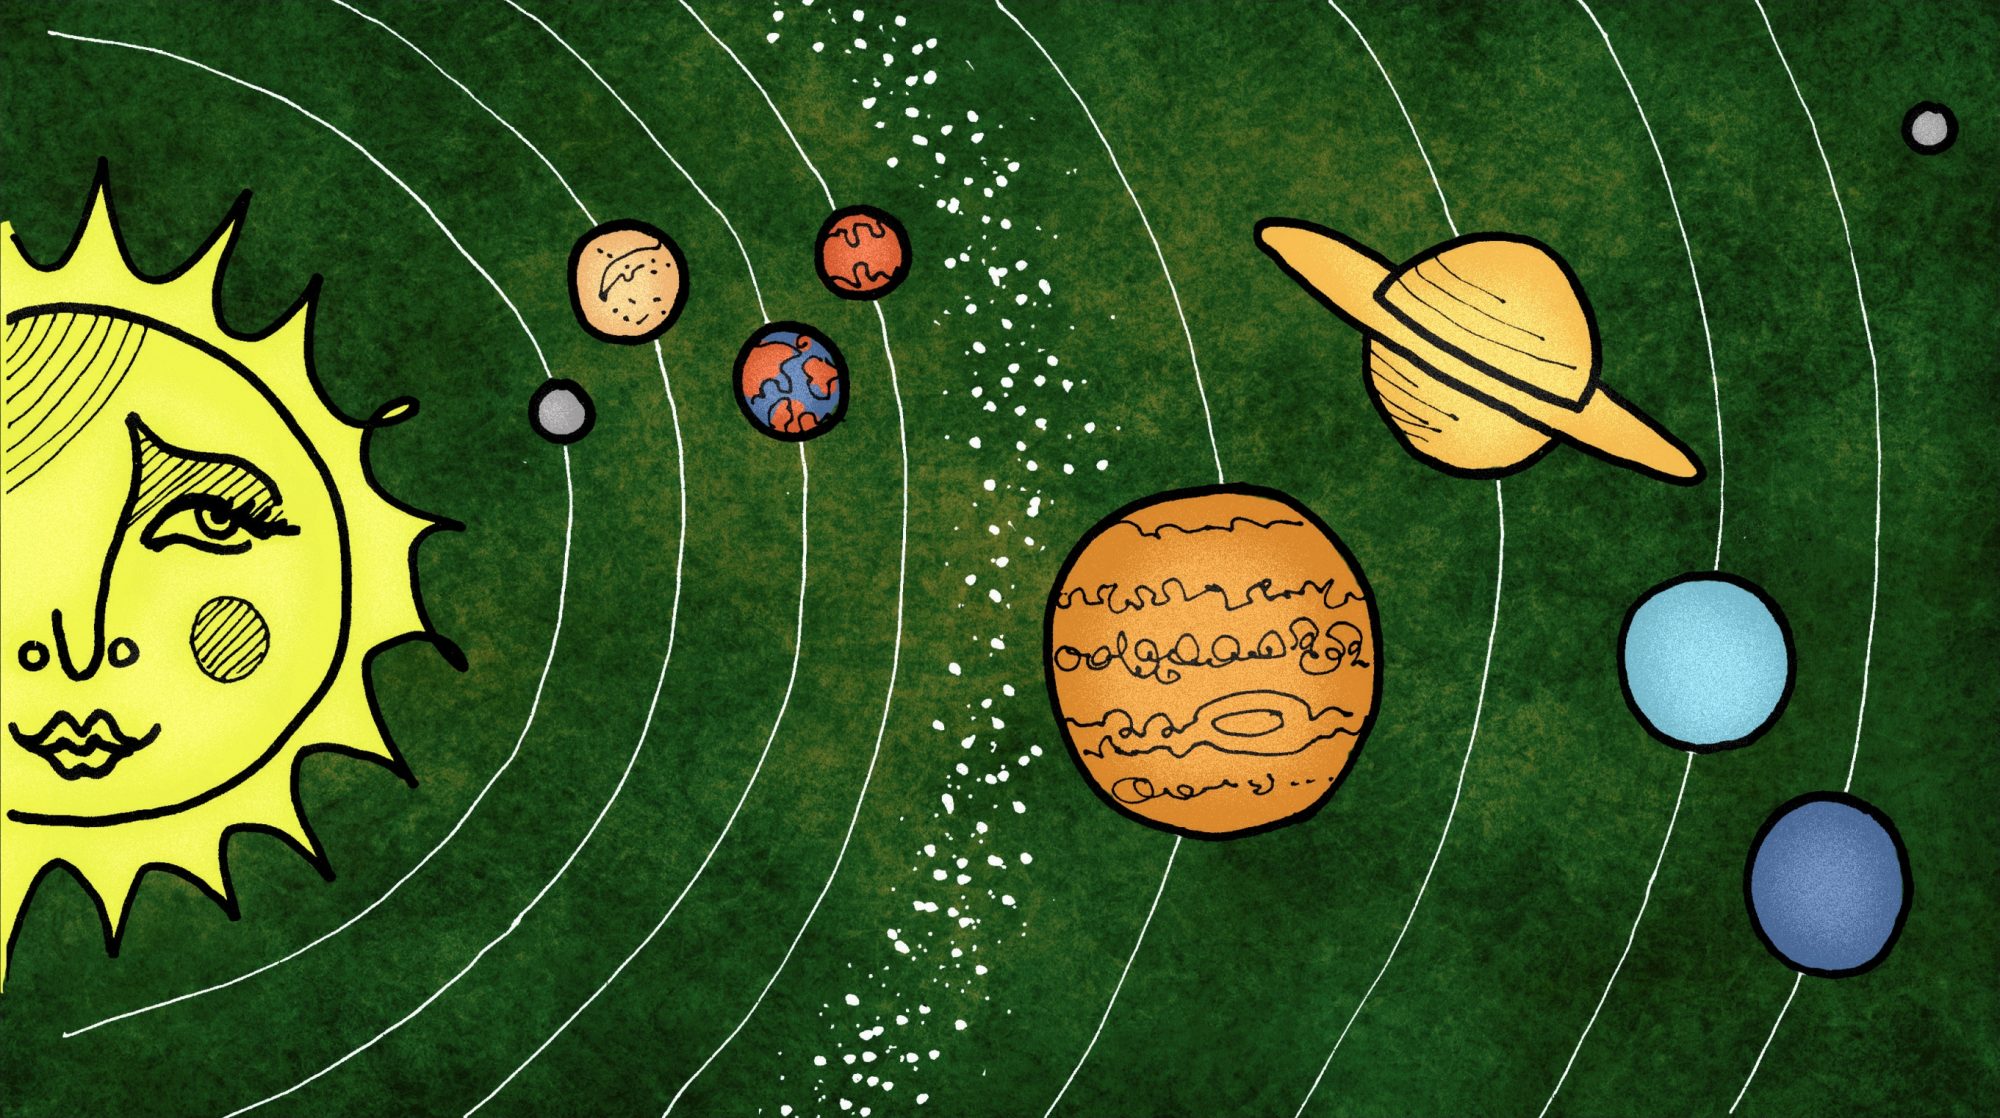 Jupiter retrograde has begun and here's what the heck that means